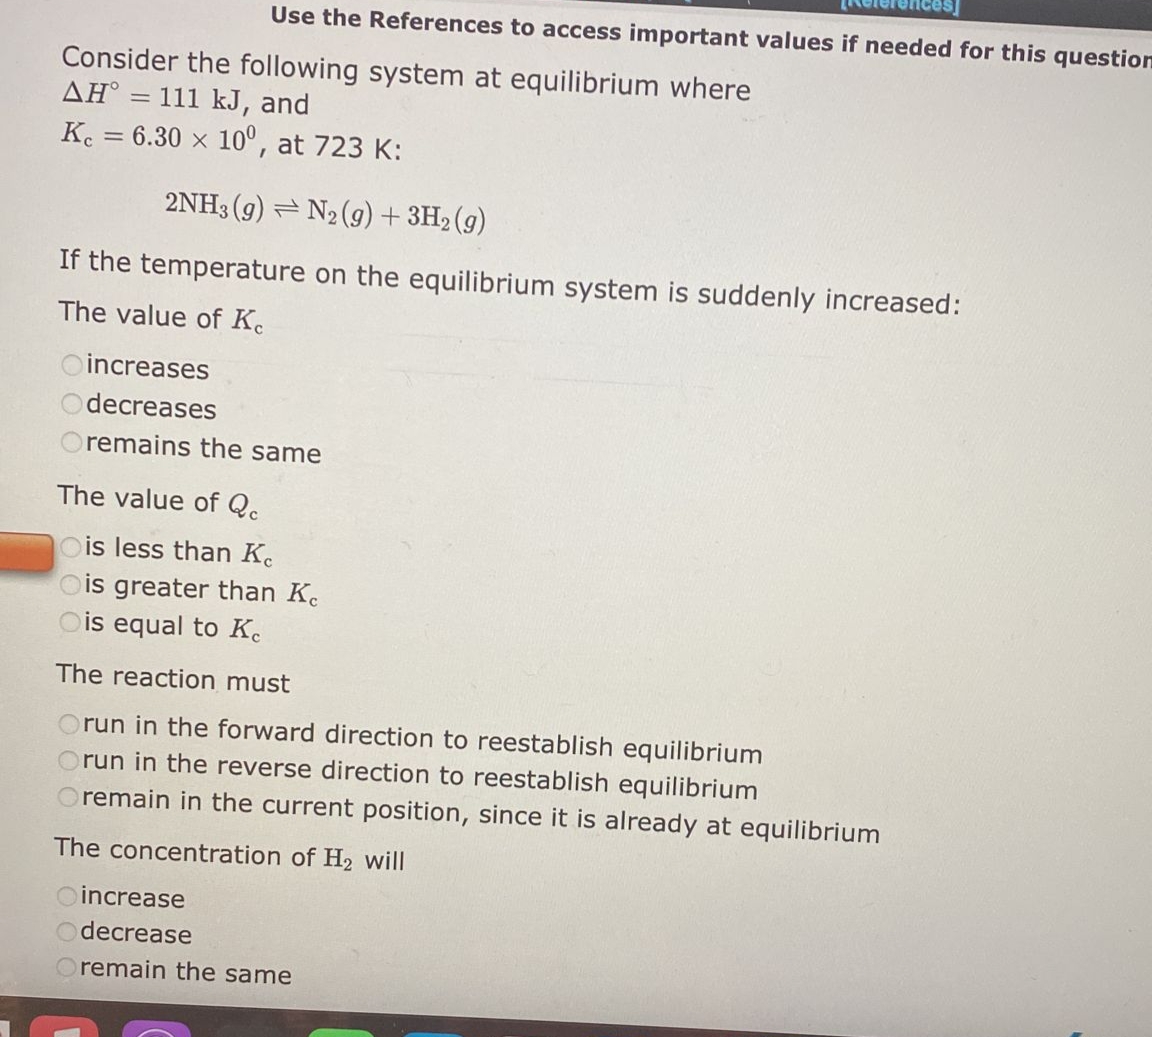 Use the References to access important values if needed for this question
Consider the following system at equilibrium where
AH° = 111 kJ, and
Kc = 6.30 x 10°, at 723 K:
2NH3 (9) N2(g) + 3H₂(g)
If the temperature on the equilibrium system is suddenly increased:
The value of Ke
Oincreases
decreases
remains the same
The value of Qc
Ois less than Kc
Ois greater than Ke
is equal to Ke
The reaction must
Orun in the forward direction to reestablish equilibrium
Orun in the reverse direction to reestablish equilibrium
remain in the current position, since it is already at equilibrium
The concentration of H₂ will
Oincrease
Odecrease
Oremain the same